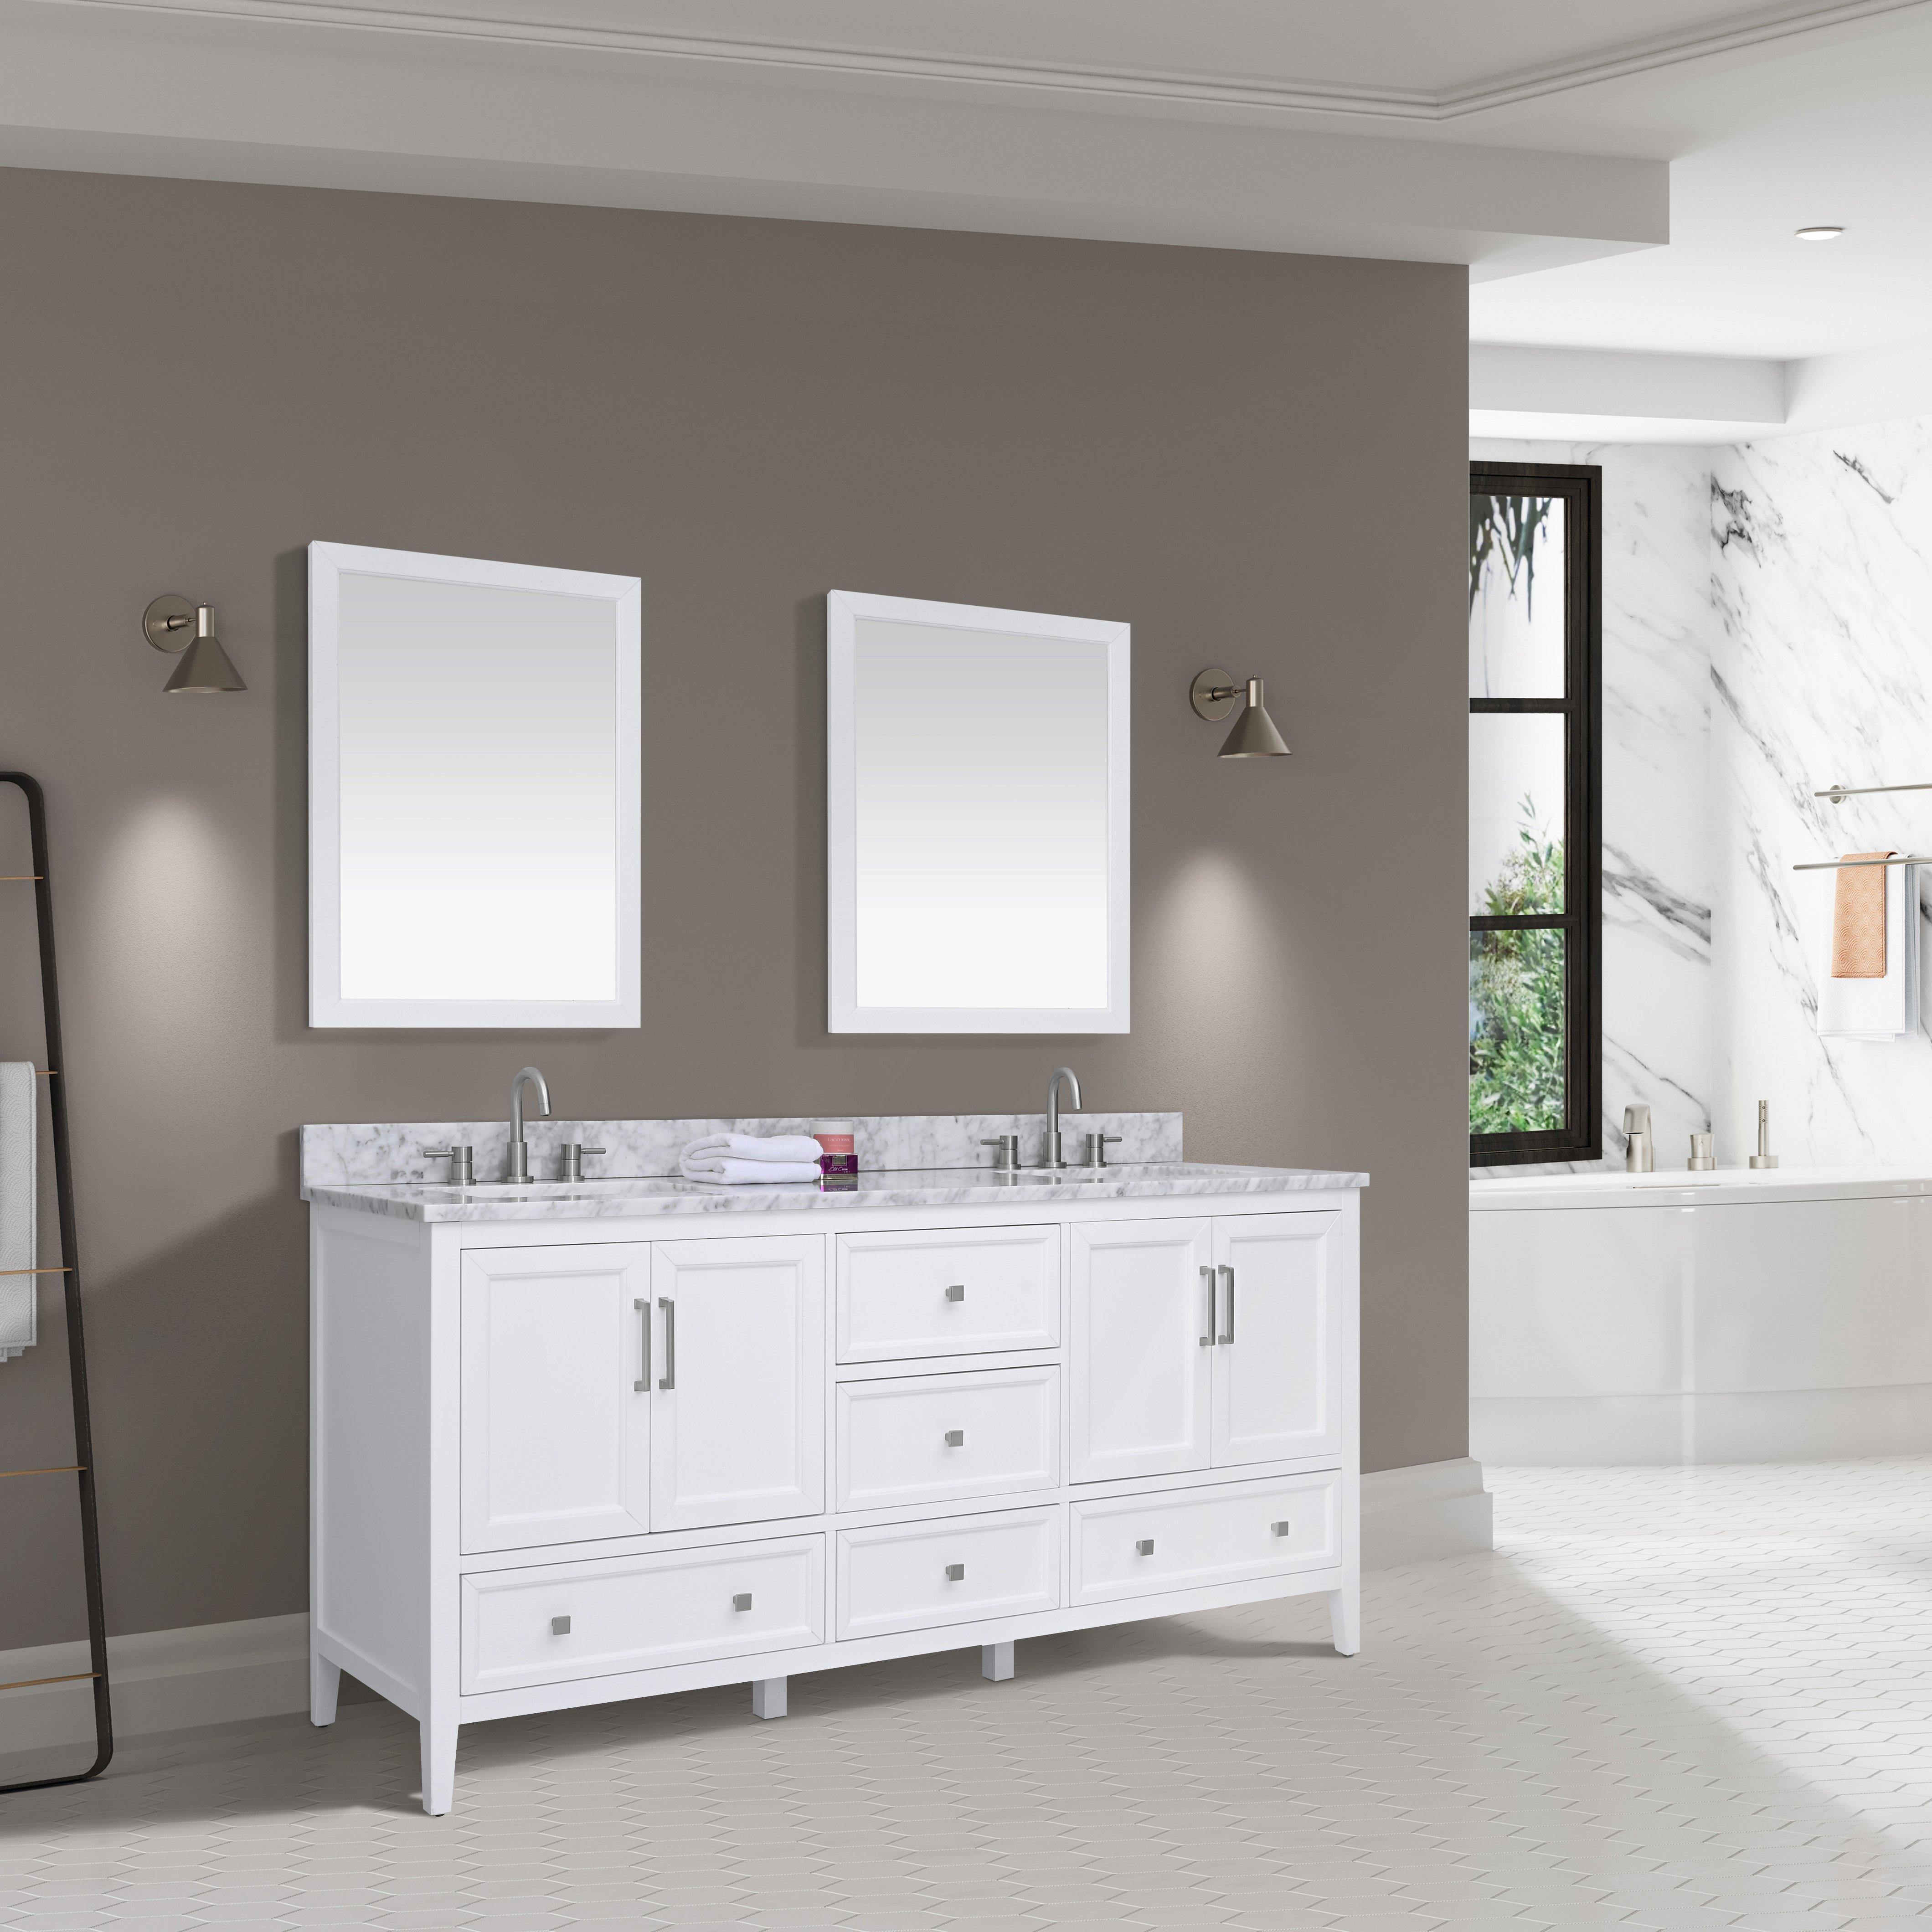 Everly 73 in. White Double Vanity with Carrara Marble Top